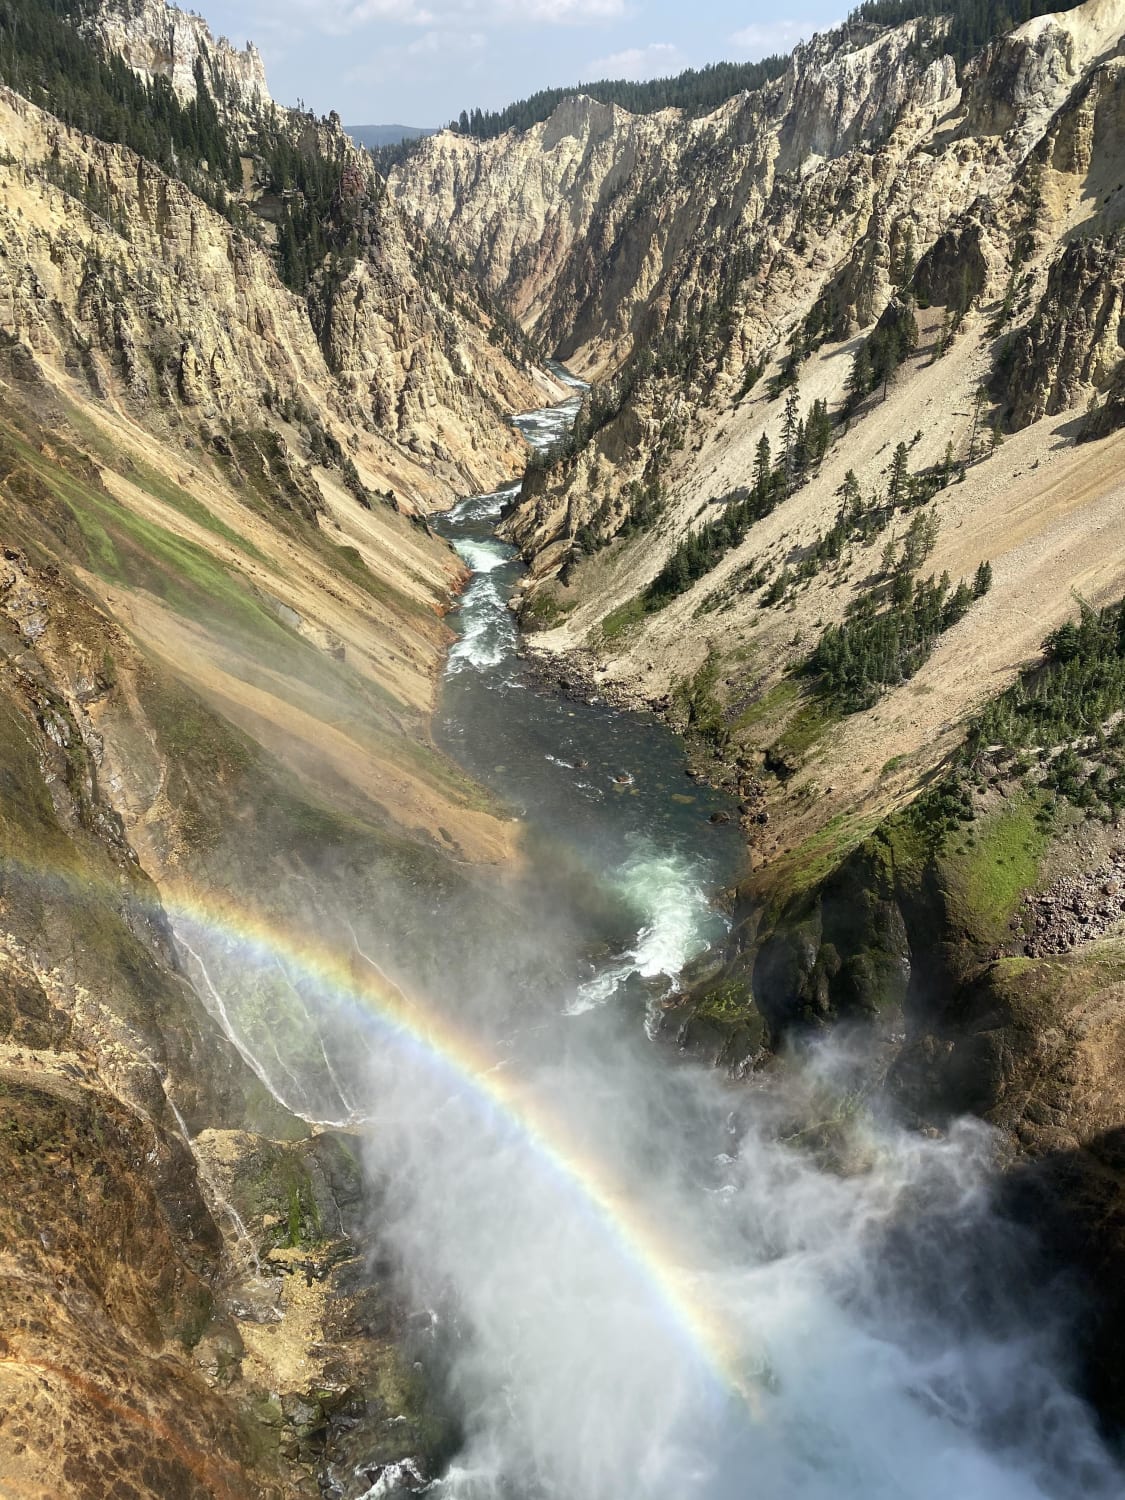 The Grand Canyon of the Yellowstone (view from the brink of the lower falls)